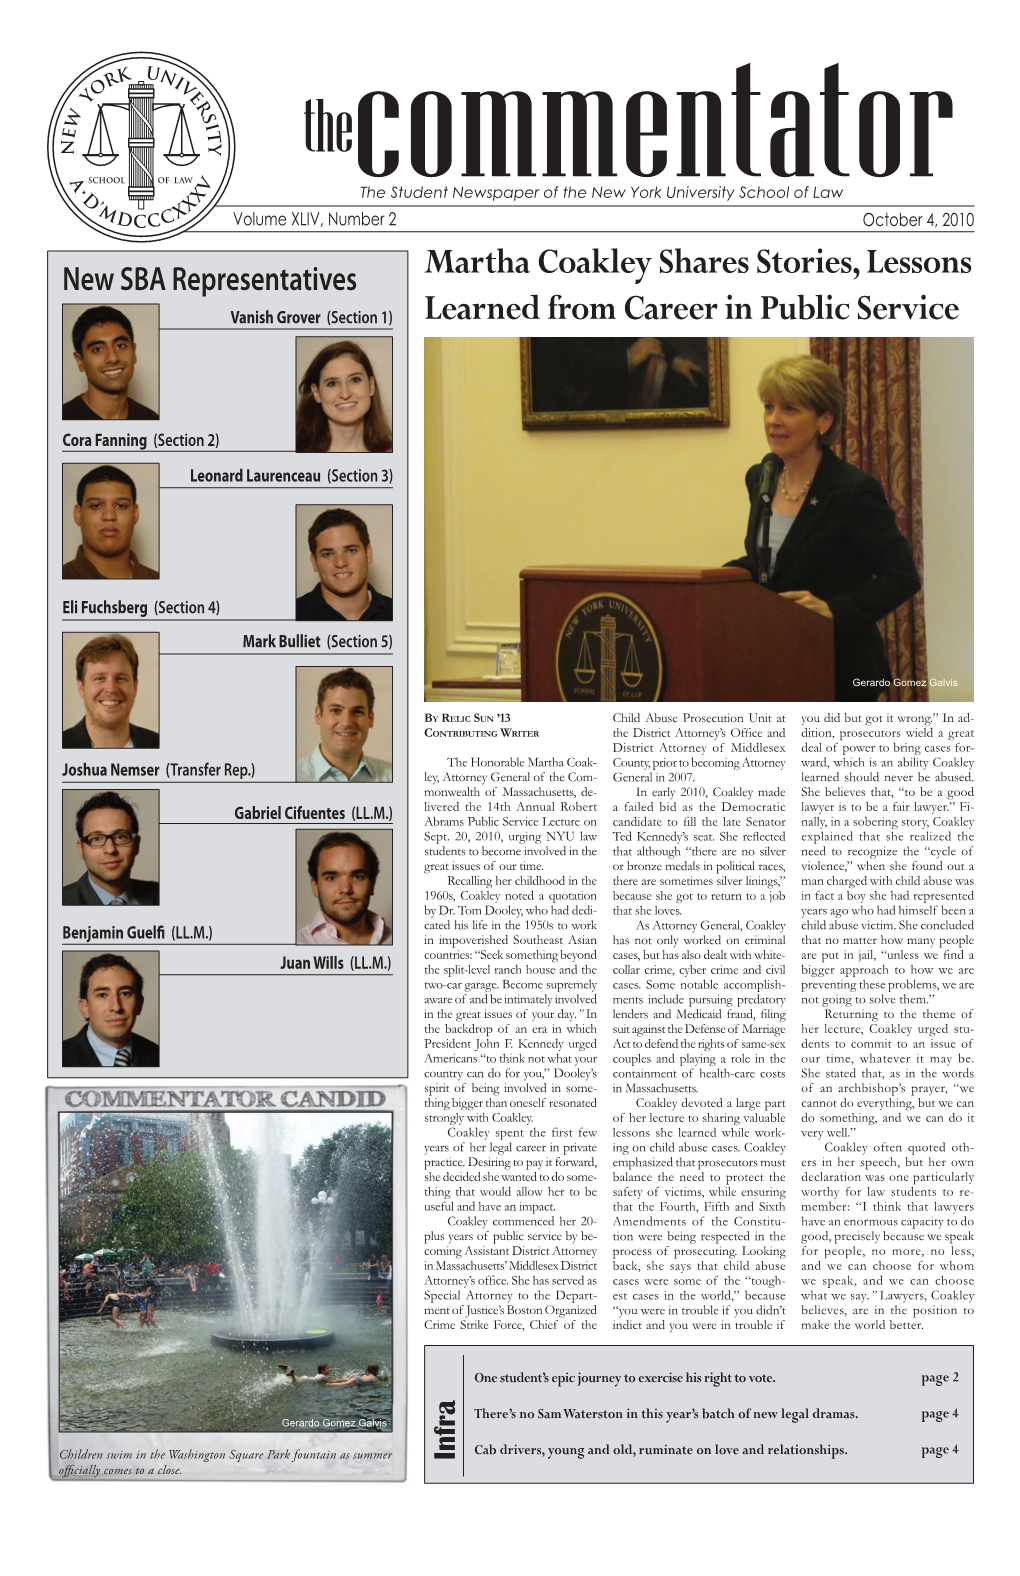 Martha Coakley Shares Stories, Lessons Learned from Career in Public Service